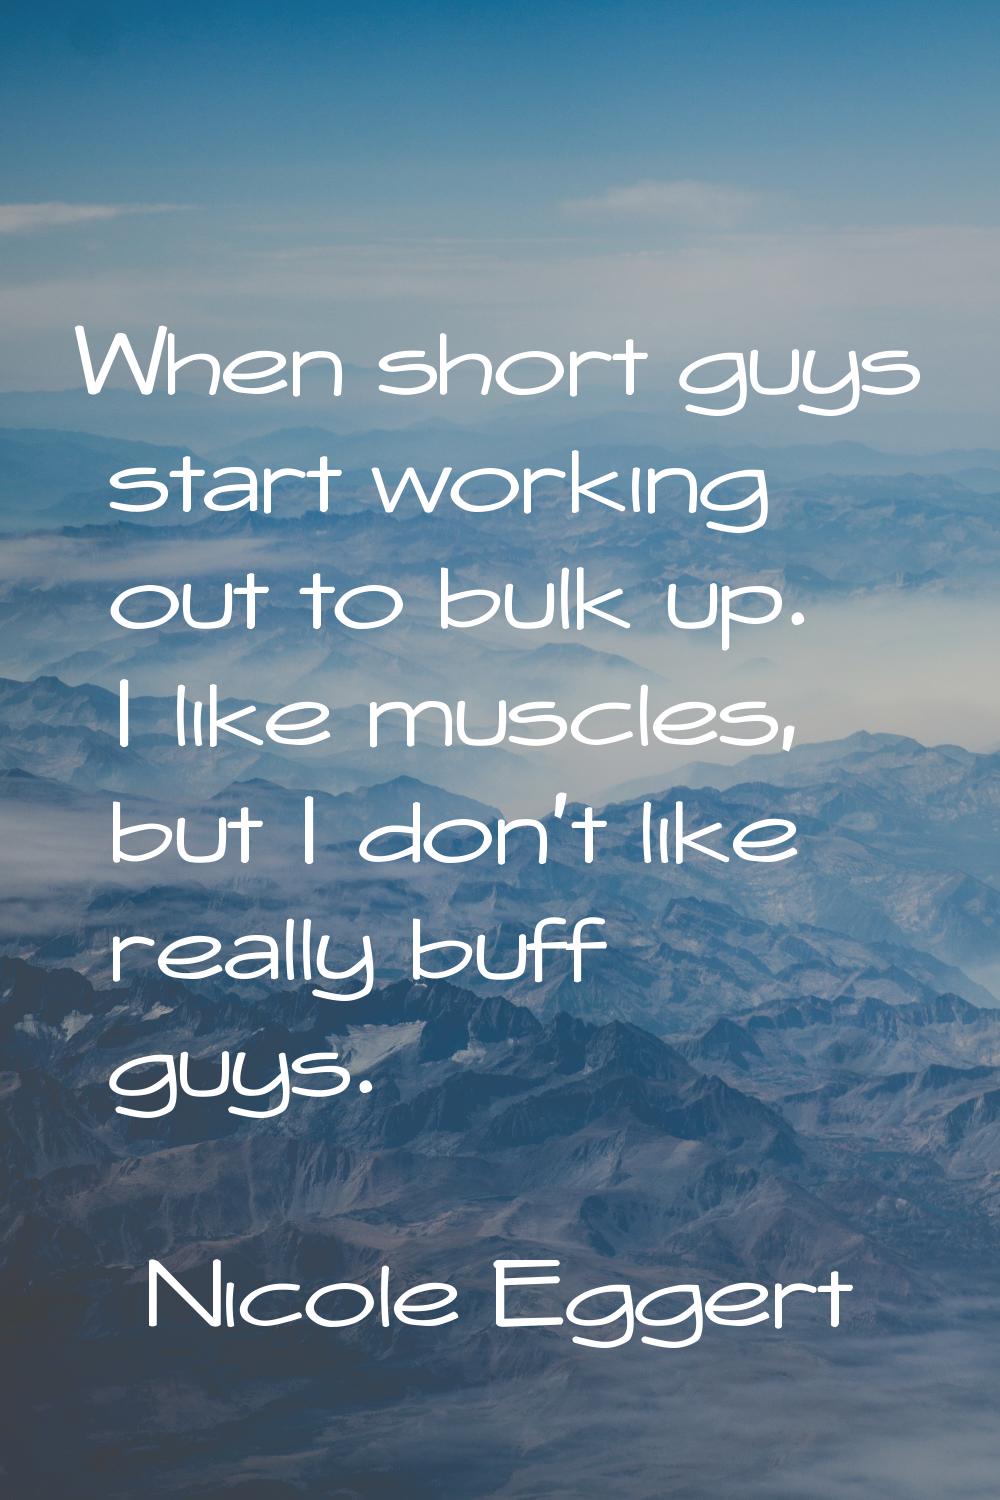 When short guys start working out to bulk up. I like muscles, but I don't like really buff guys.